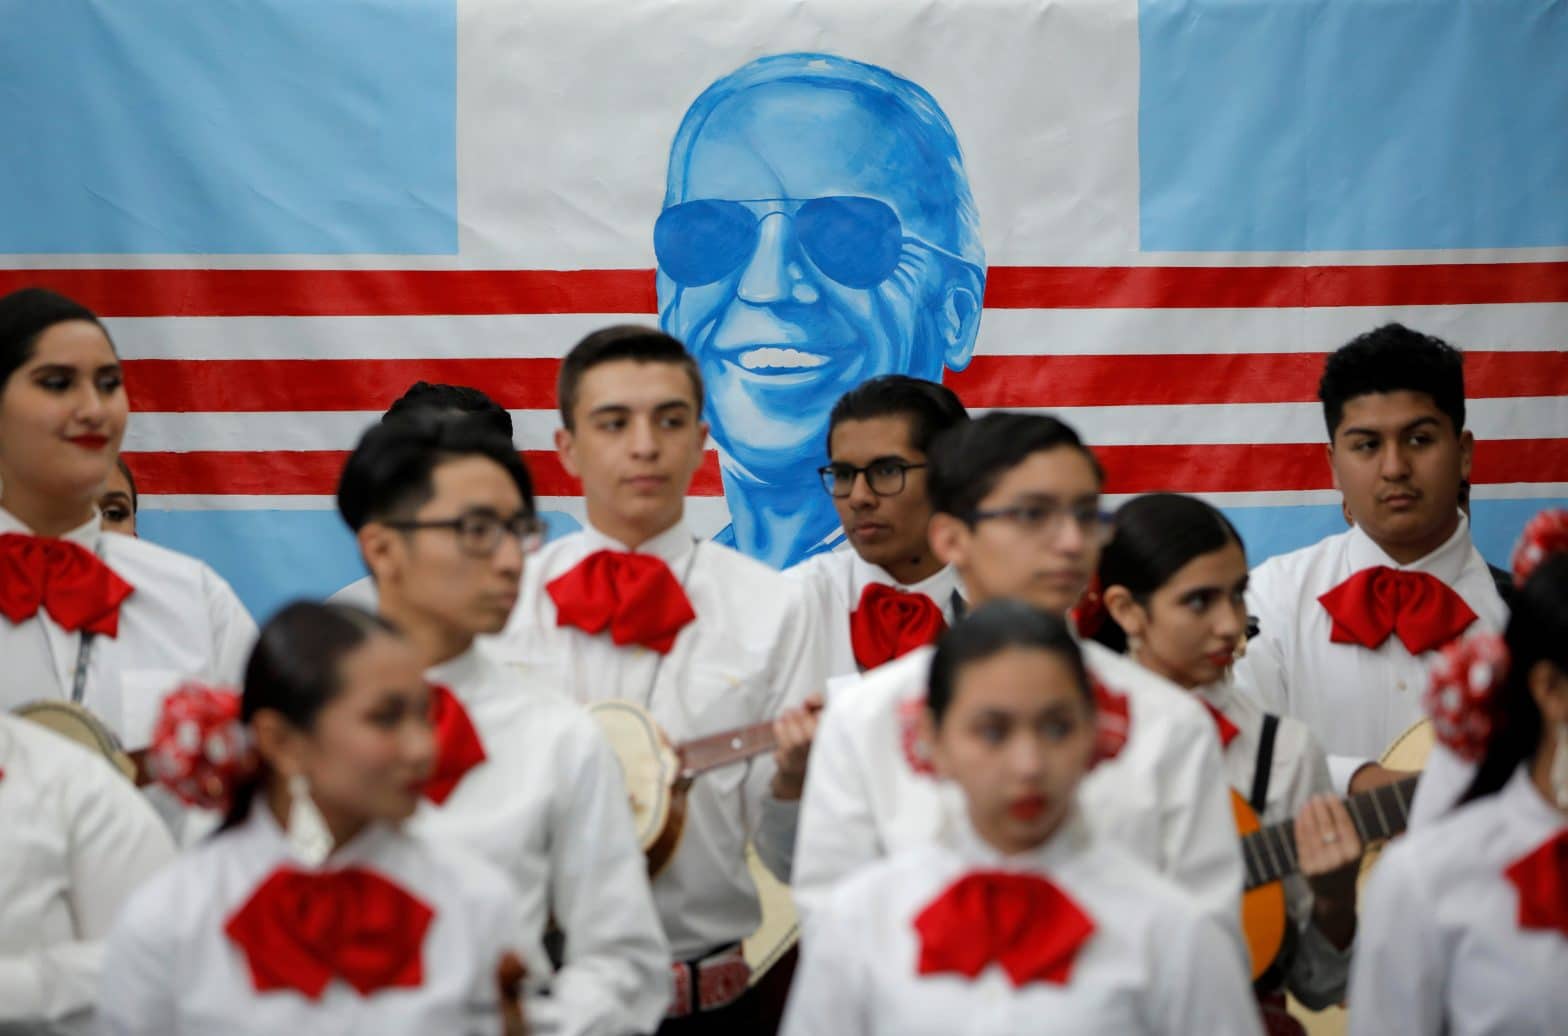 Tuesday’s Primaries Offer Chance for Biden to Reach Latinos